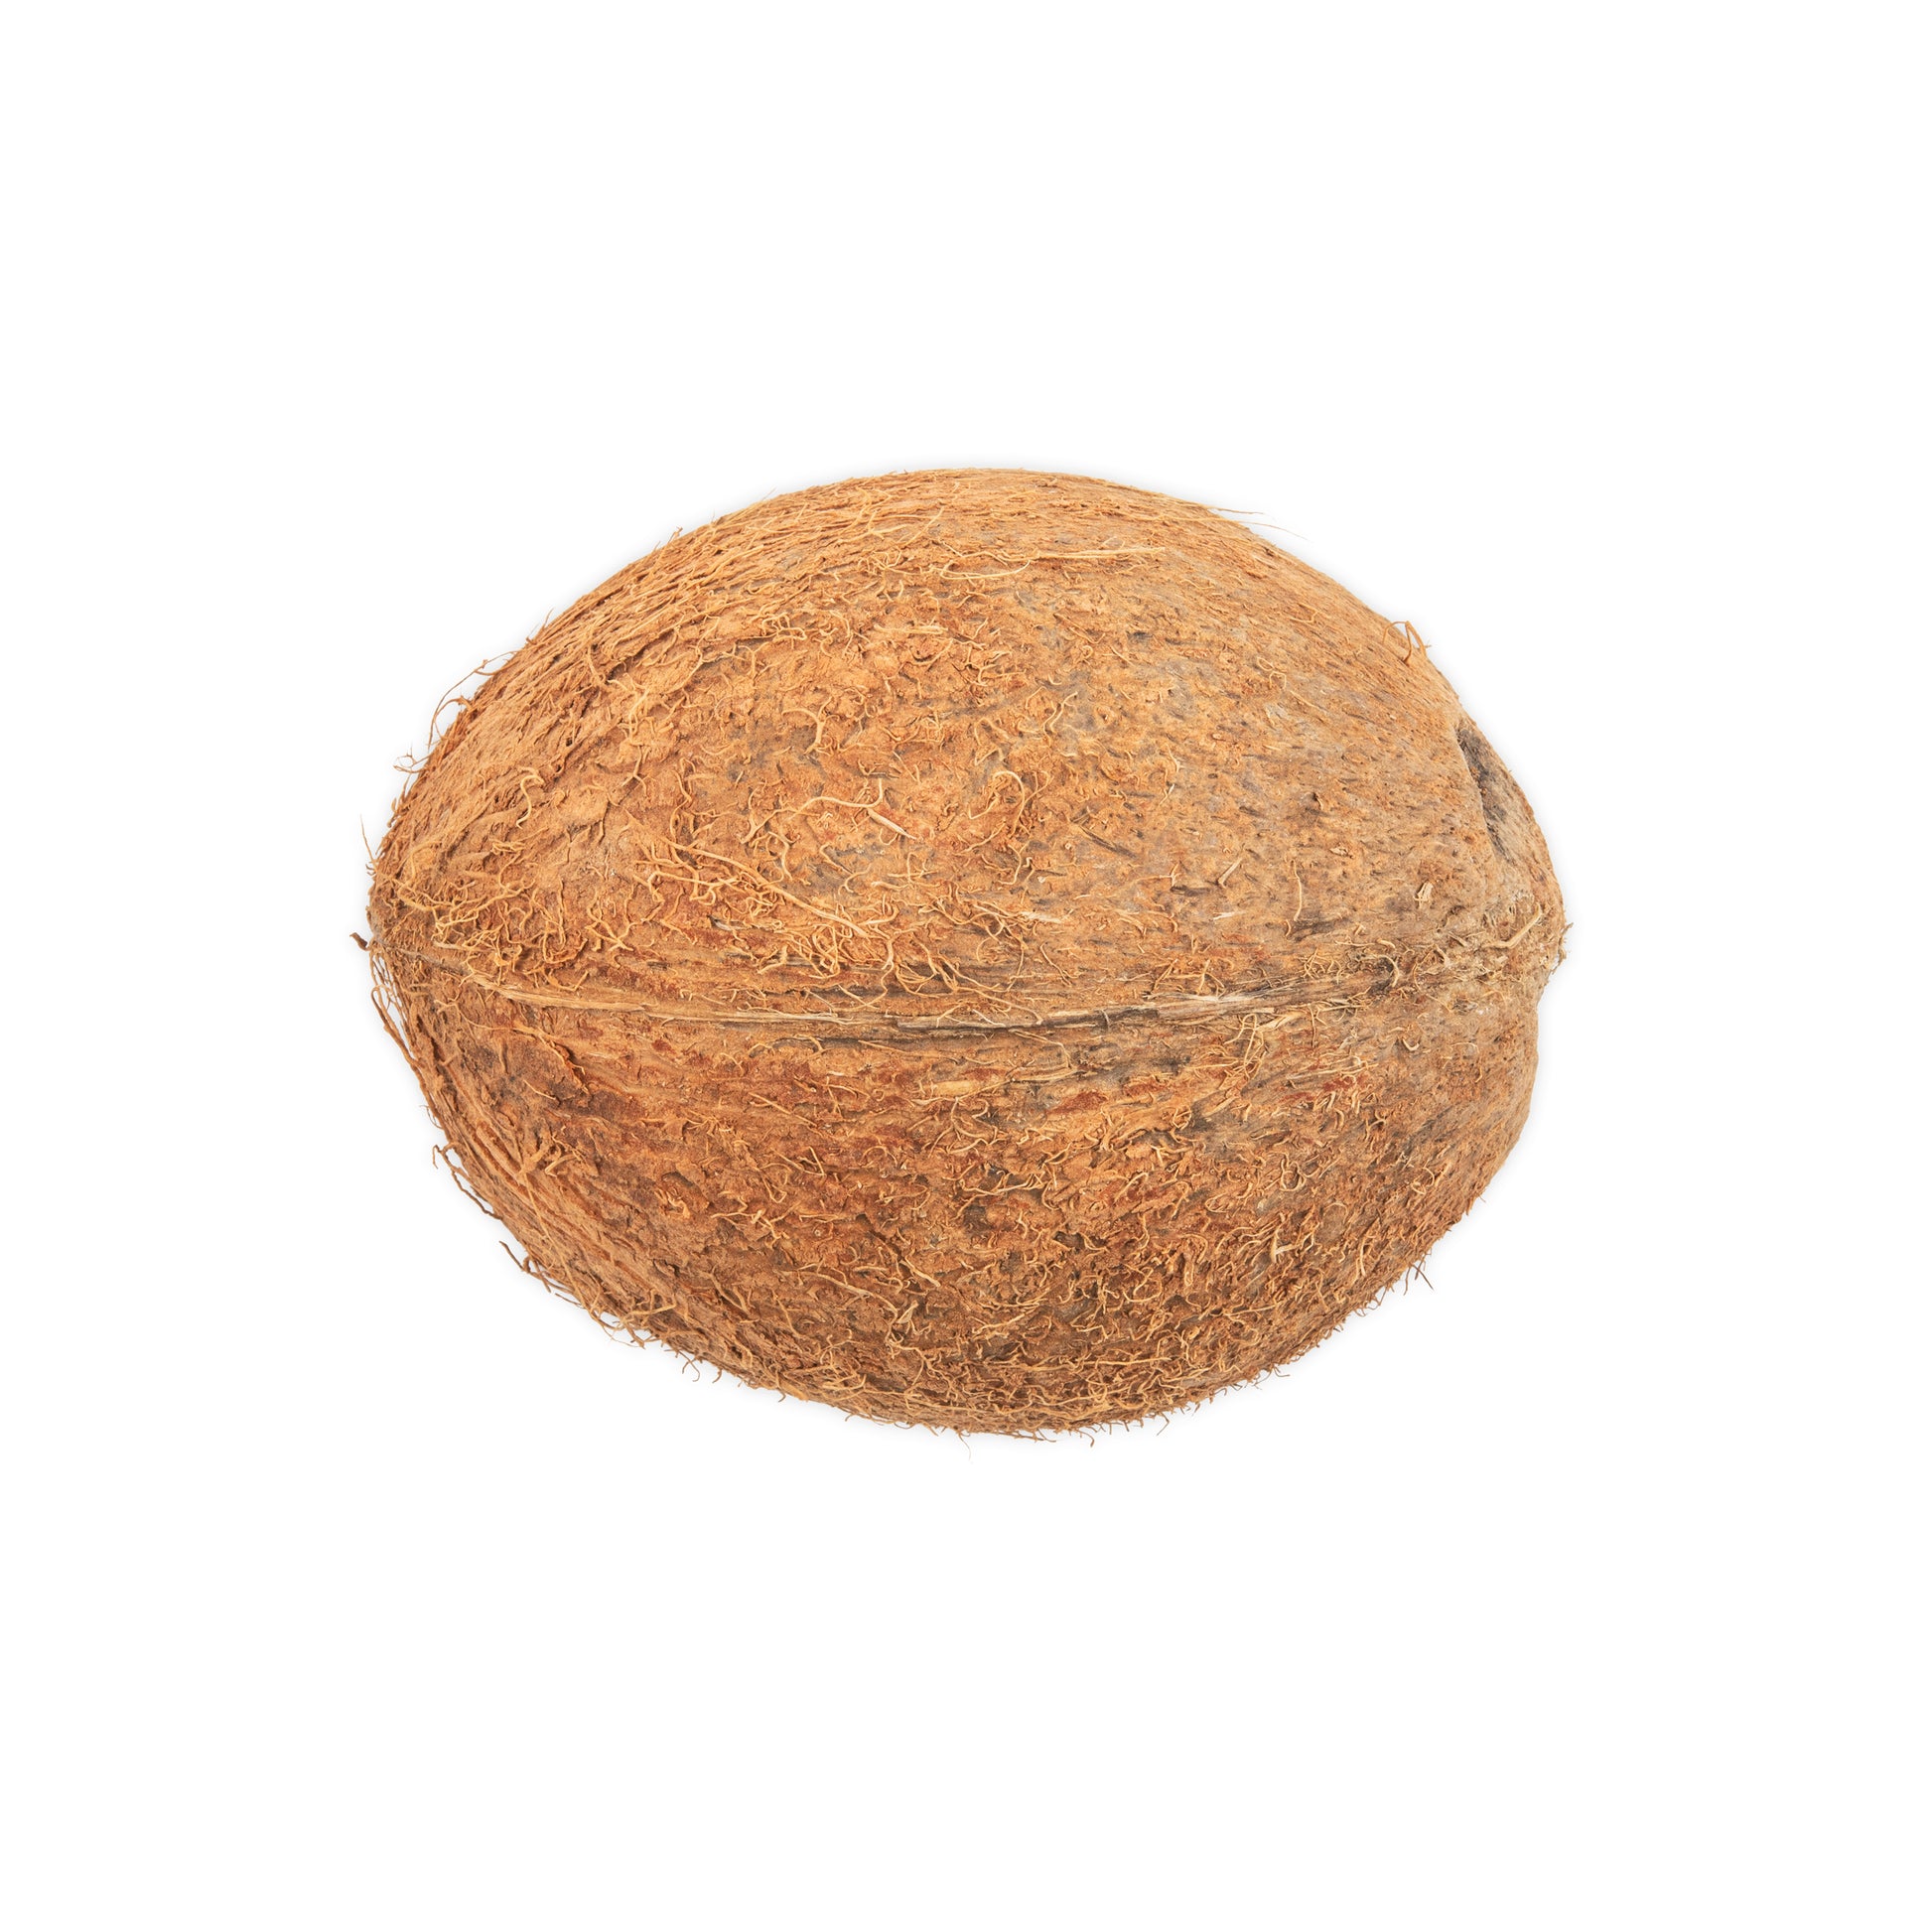 bottom of coconut shell half with fiber and hair